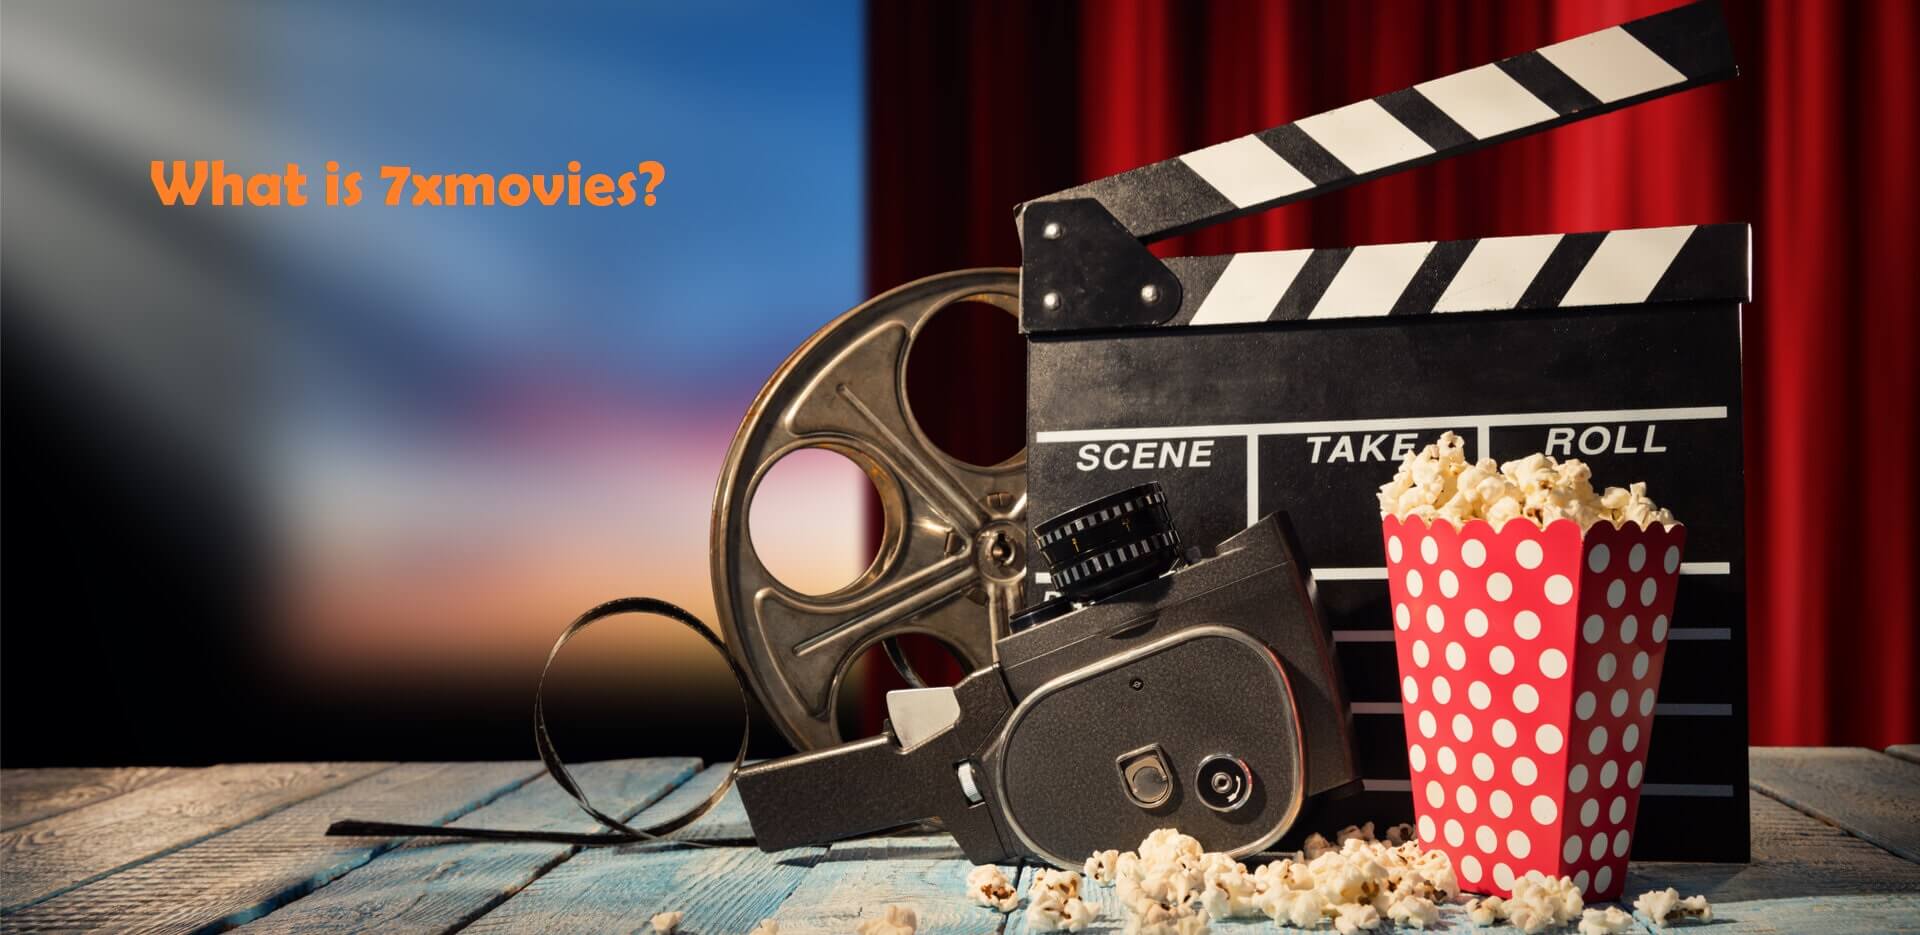 What is 7xmovies?